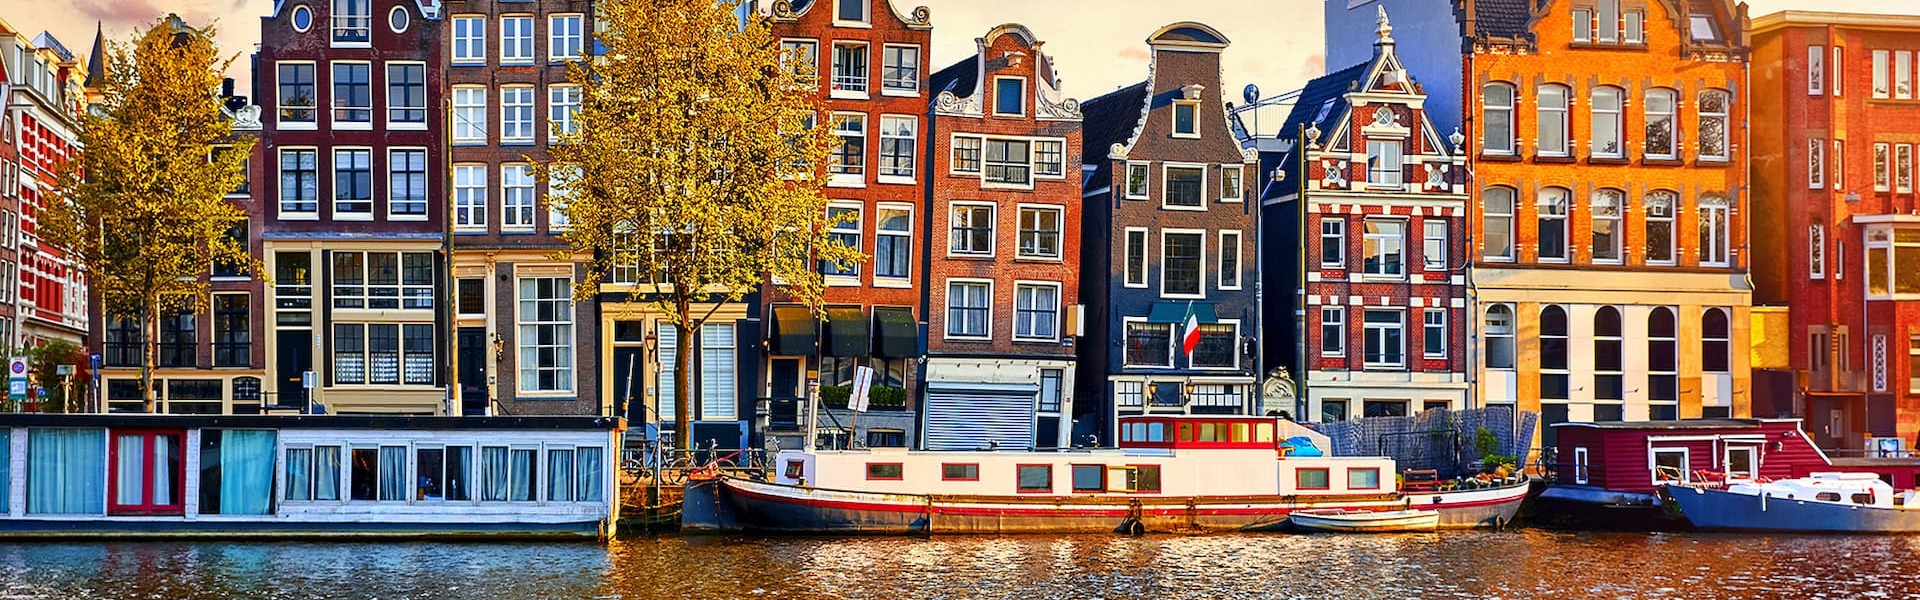 Canal in Amsterdam with unique, colorful houses and beautiful sky